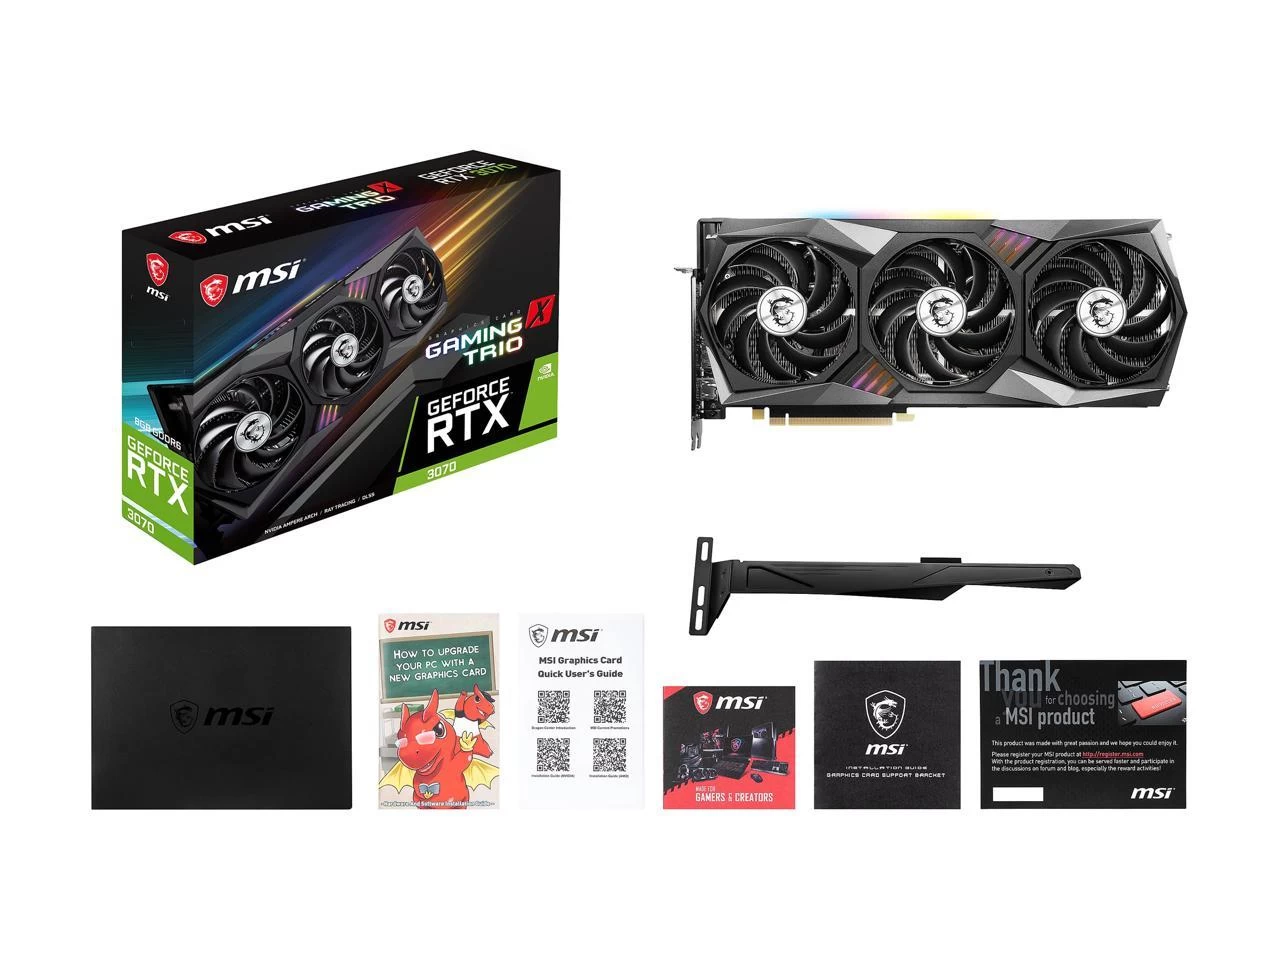 MSI GeForce RTX 3070 GAMING X TRIO Package Content